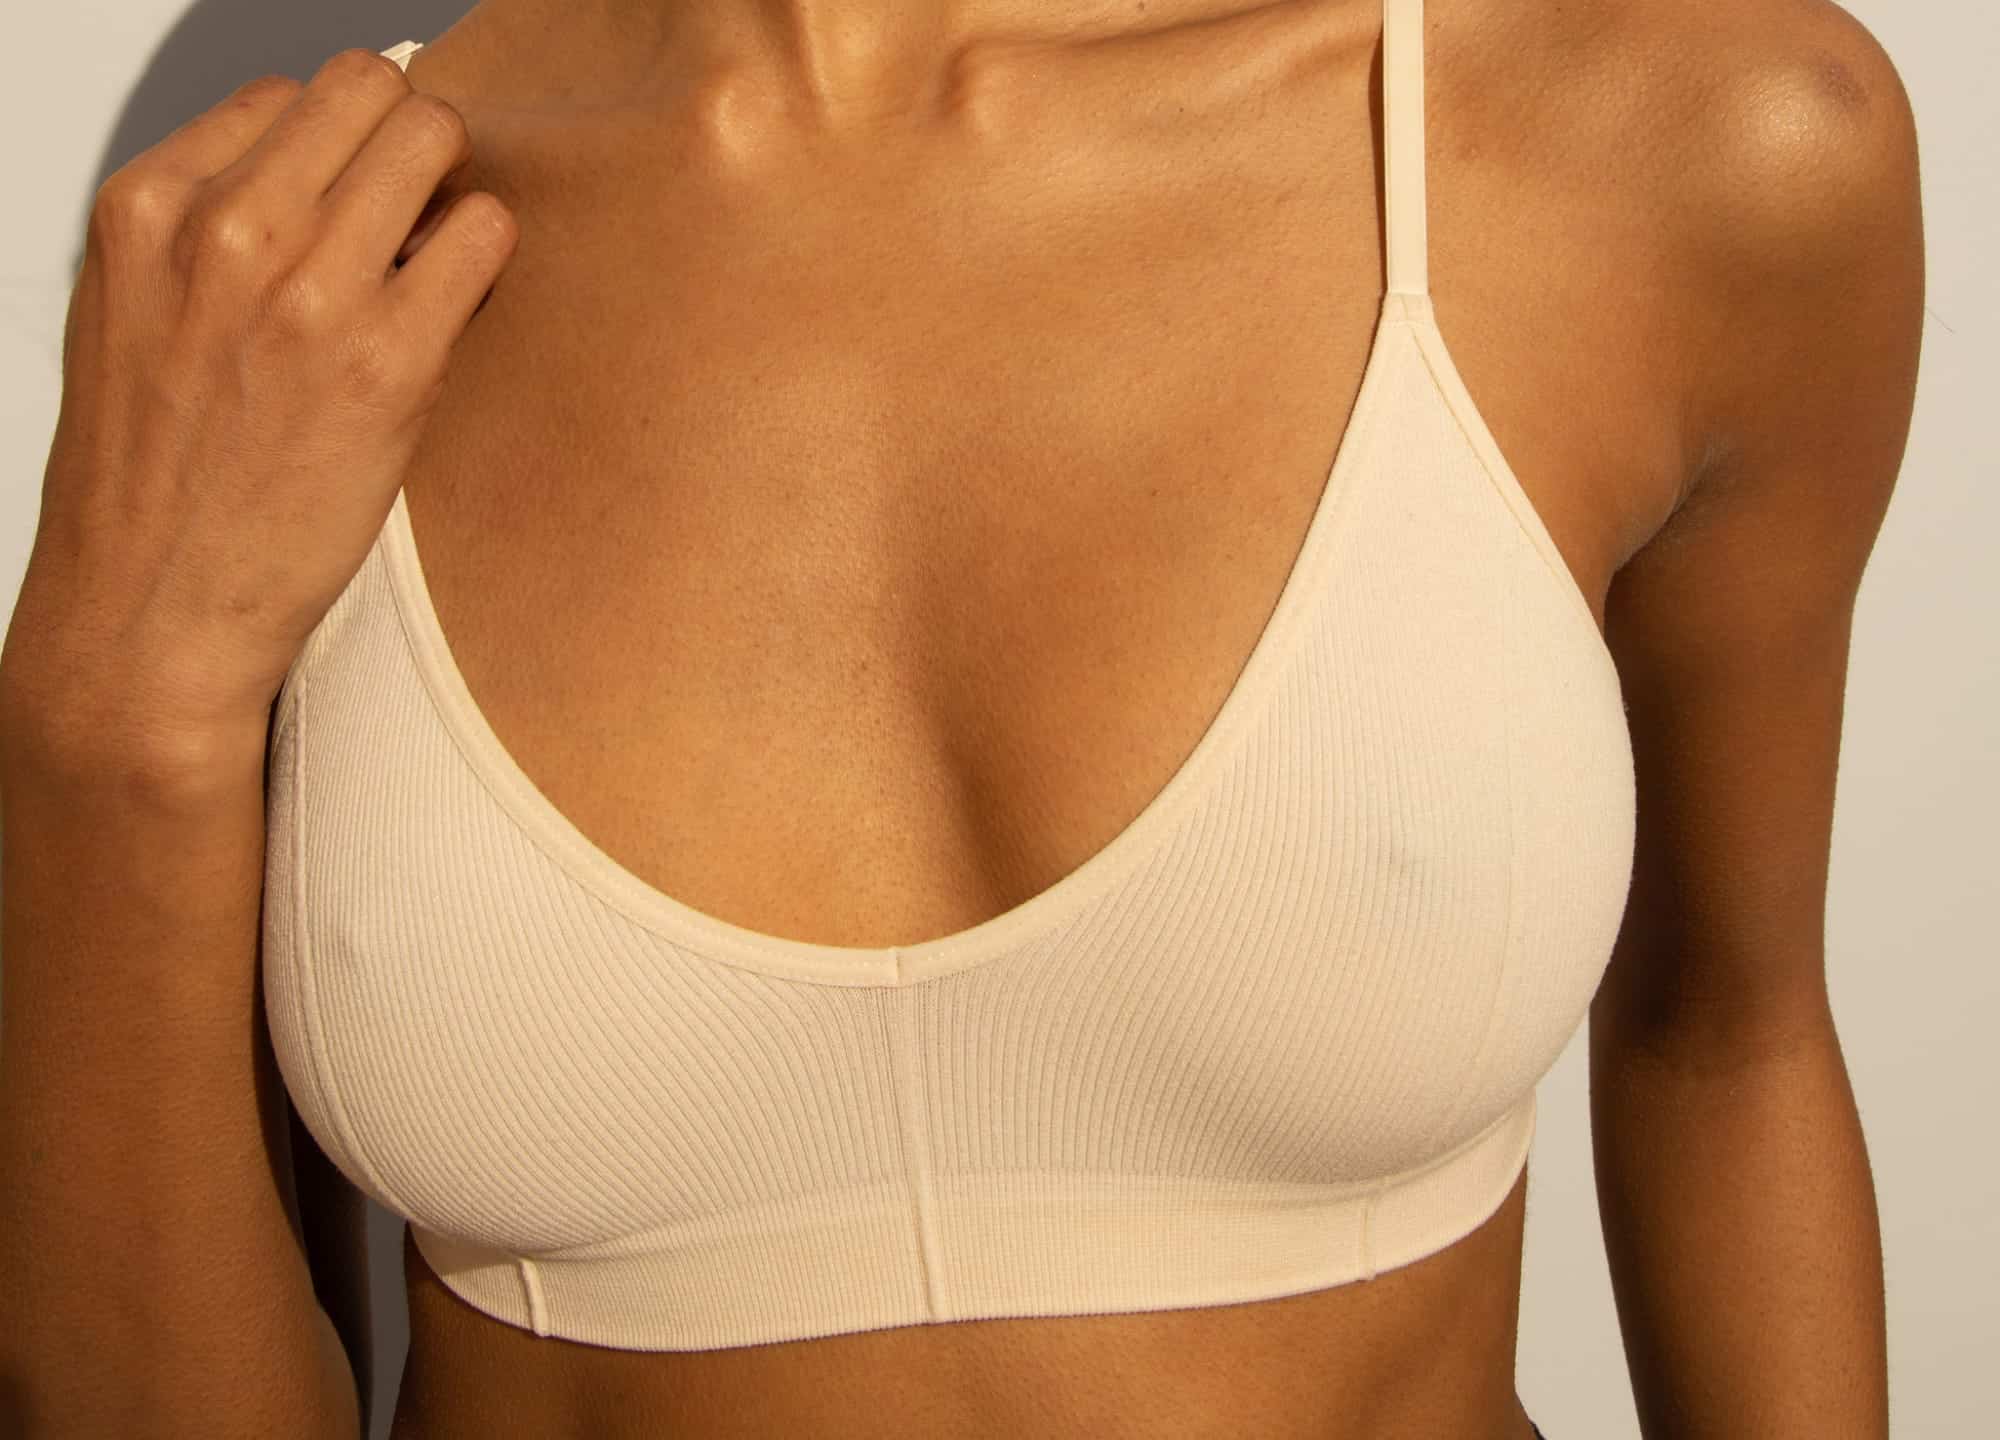 How Natural Breast Augmentation Makes Your Breasts Bigger Without